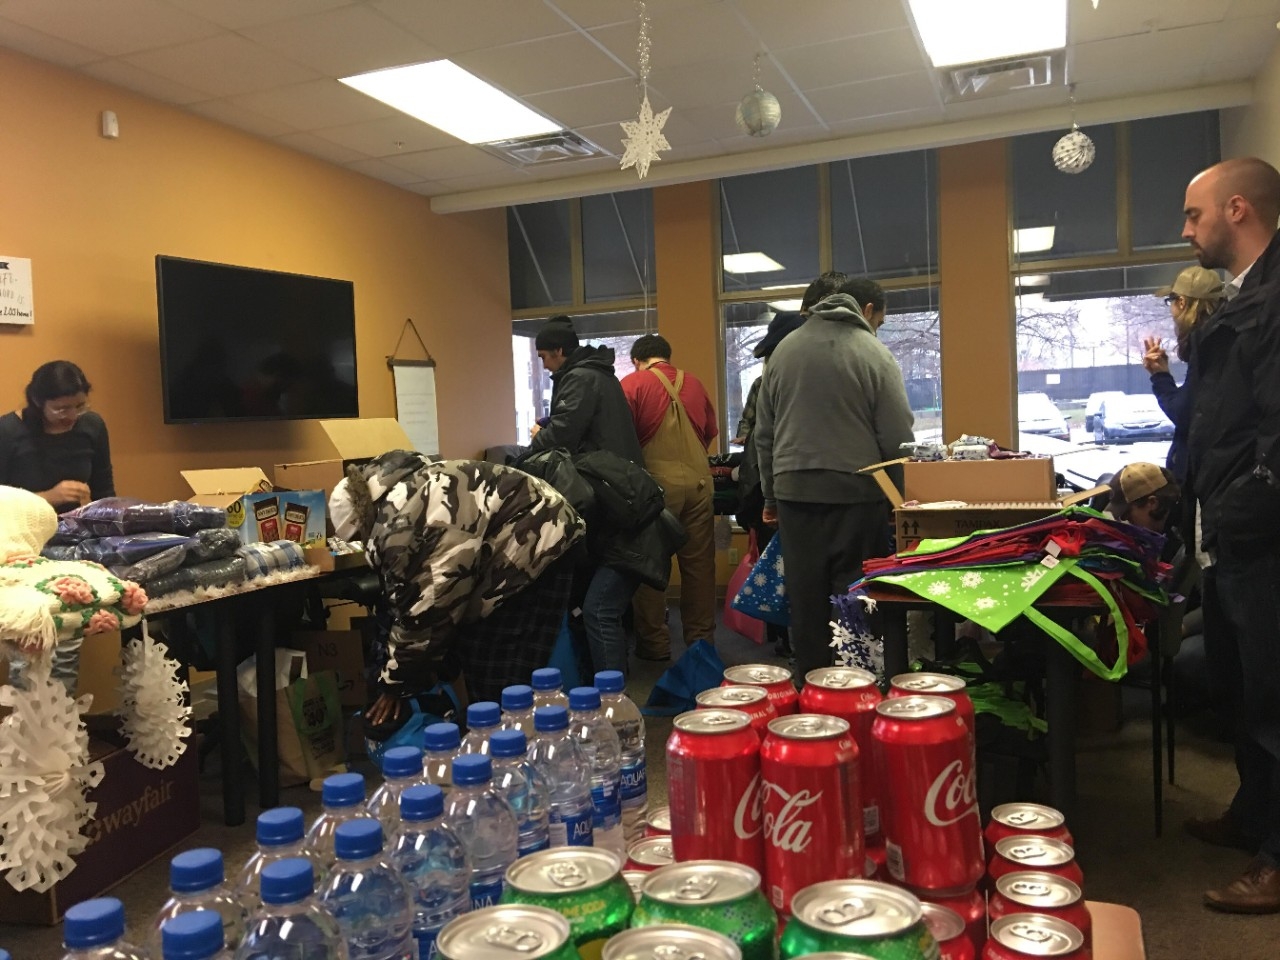 Volunteers sorting food and drink at a homeless shelter.